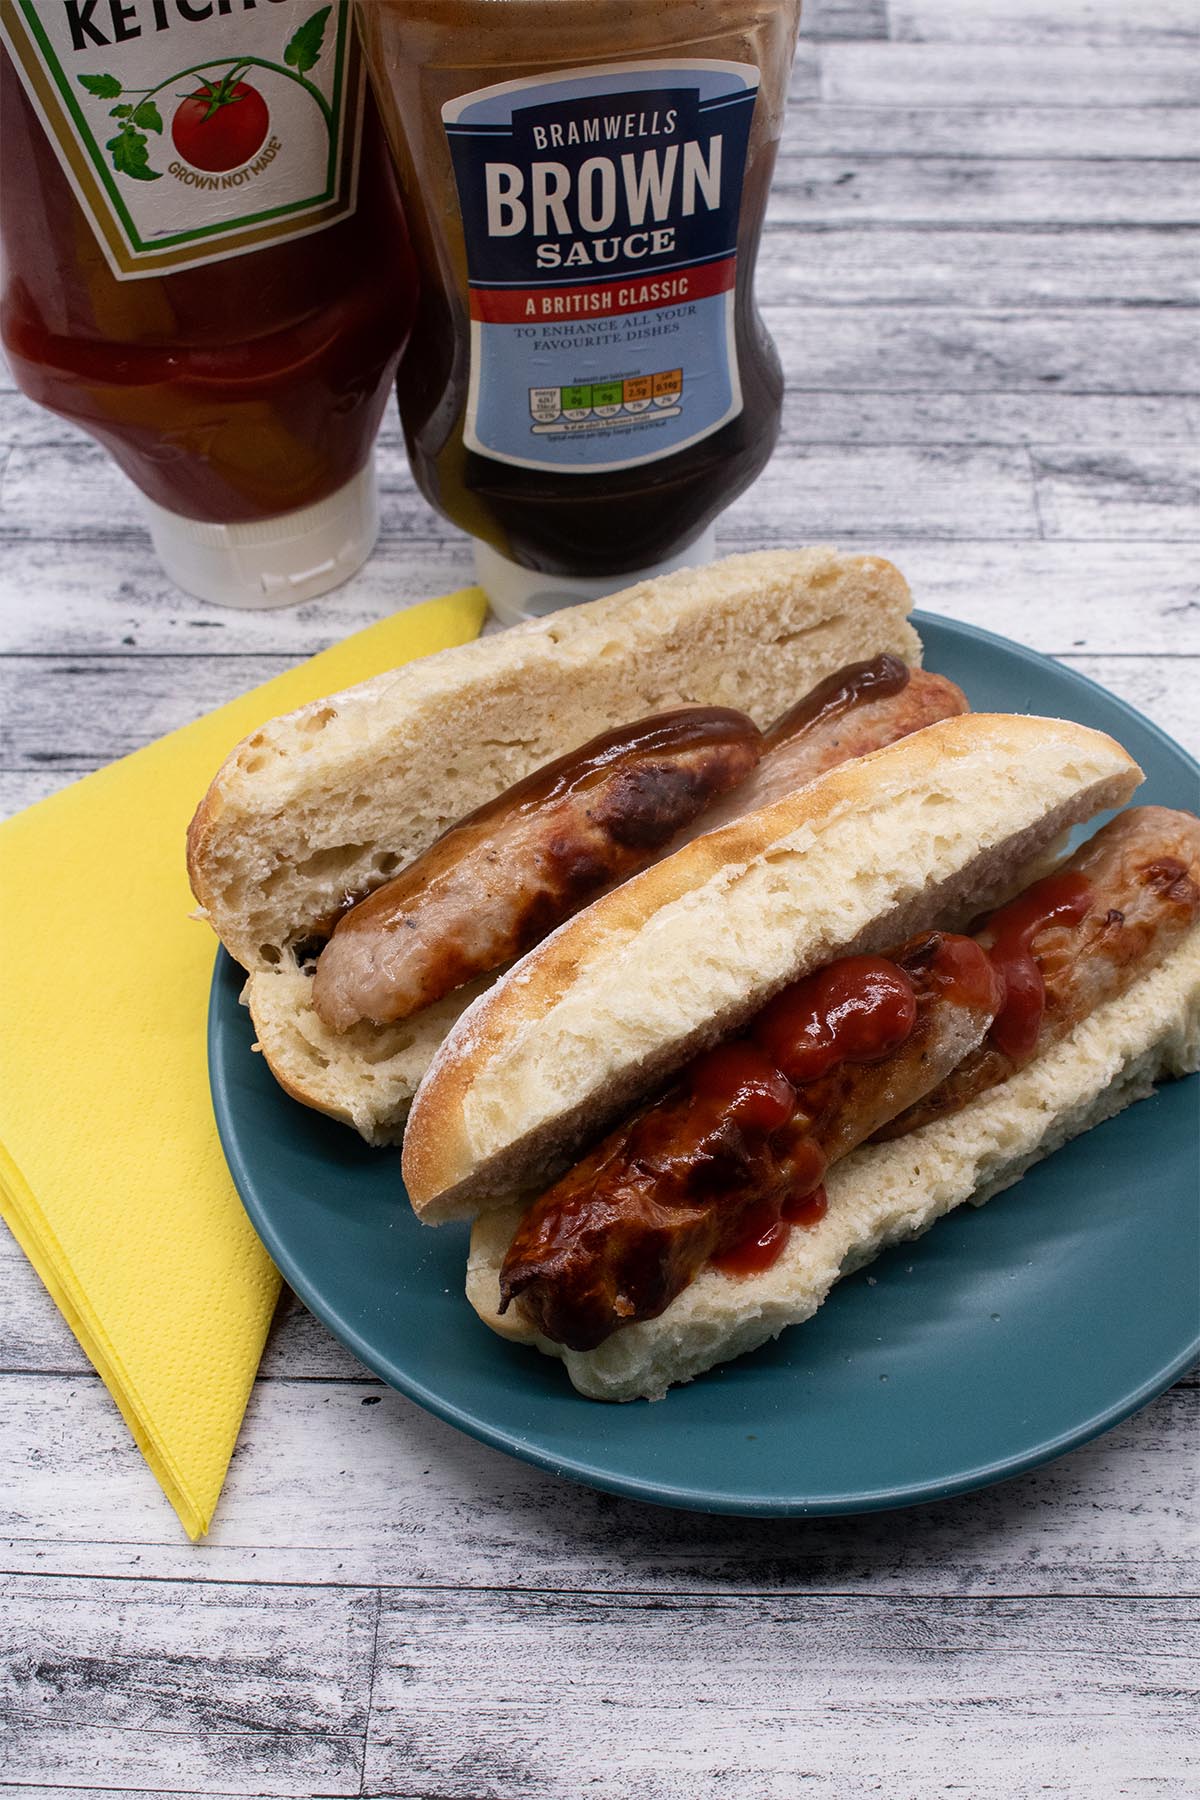 Sausages in side and white finger roll with tomato and brown sauce and sauce bottles